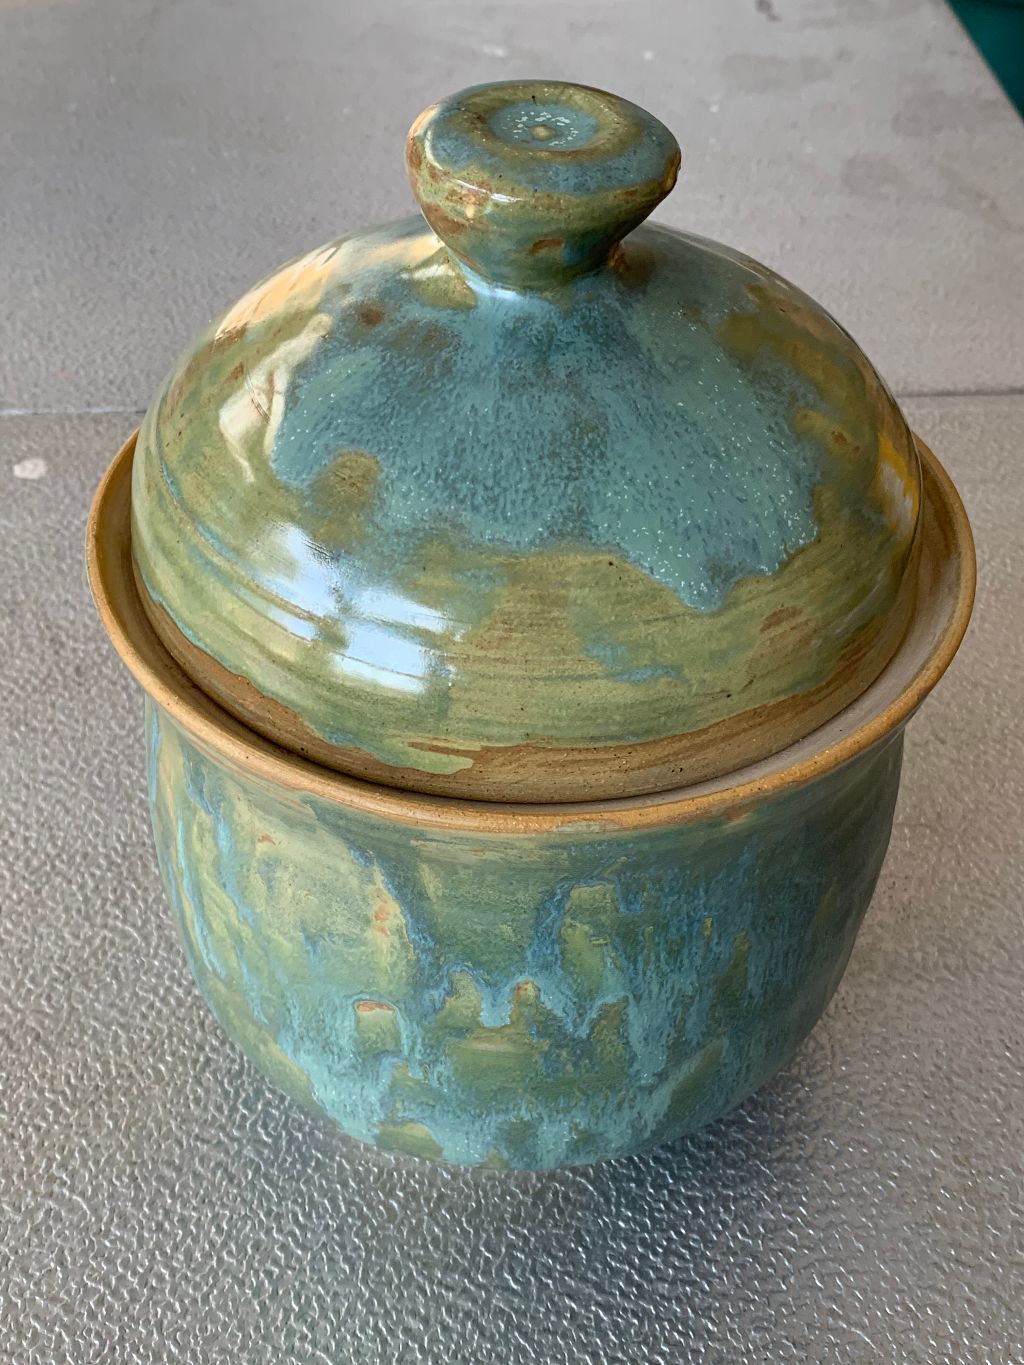 Functional Pots - CageyCreations Pottery & Sculpture